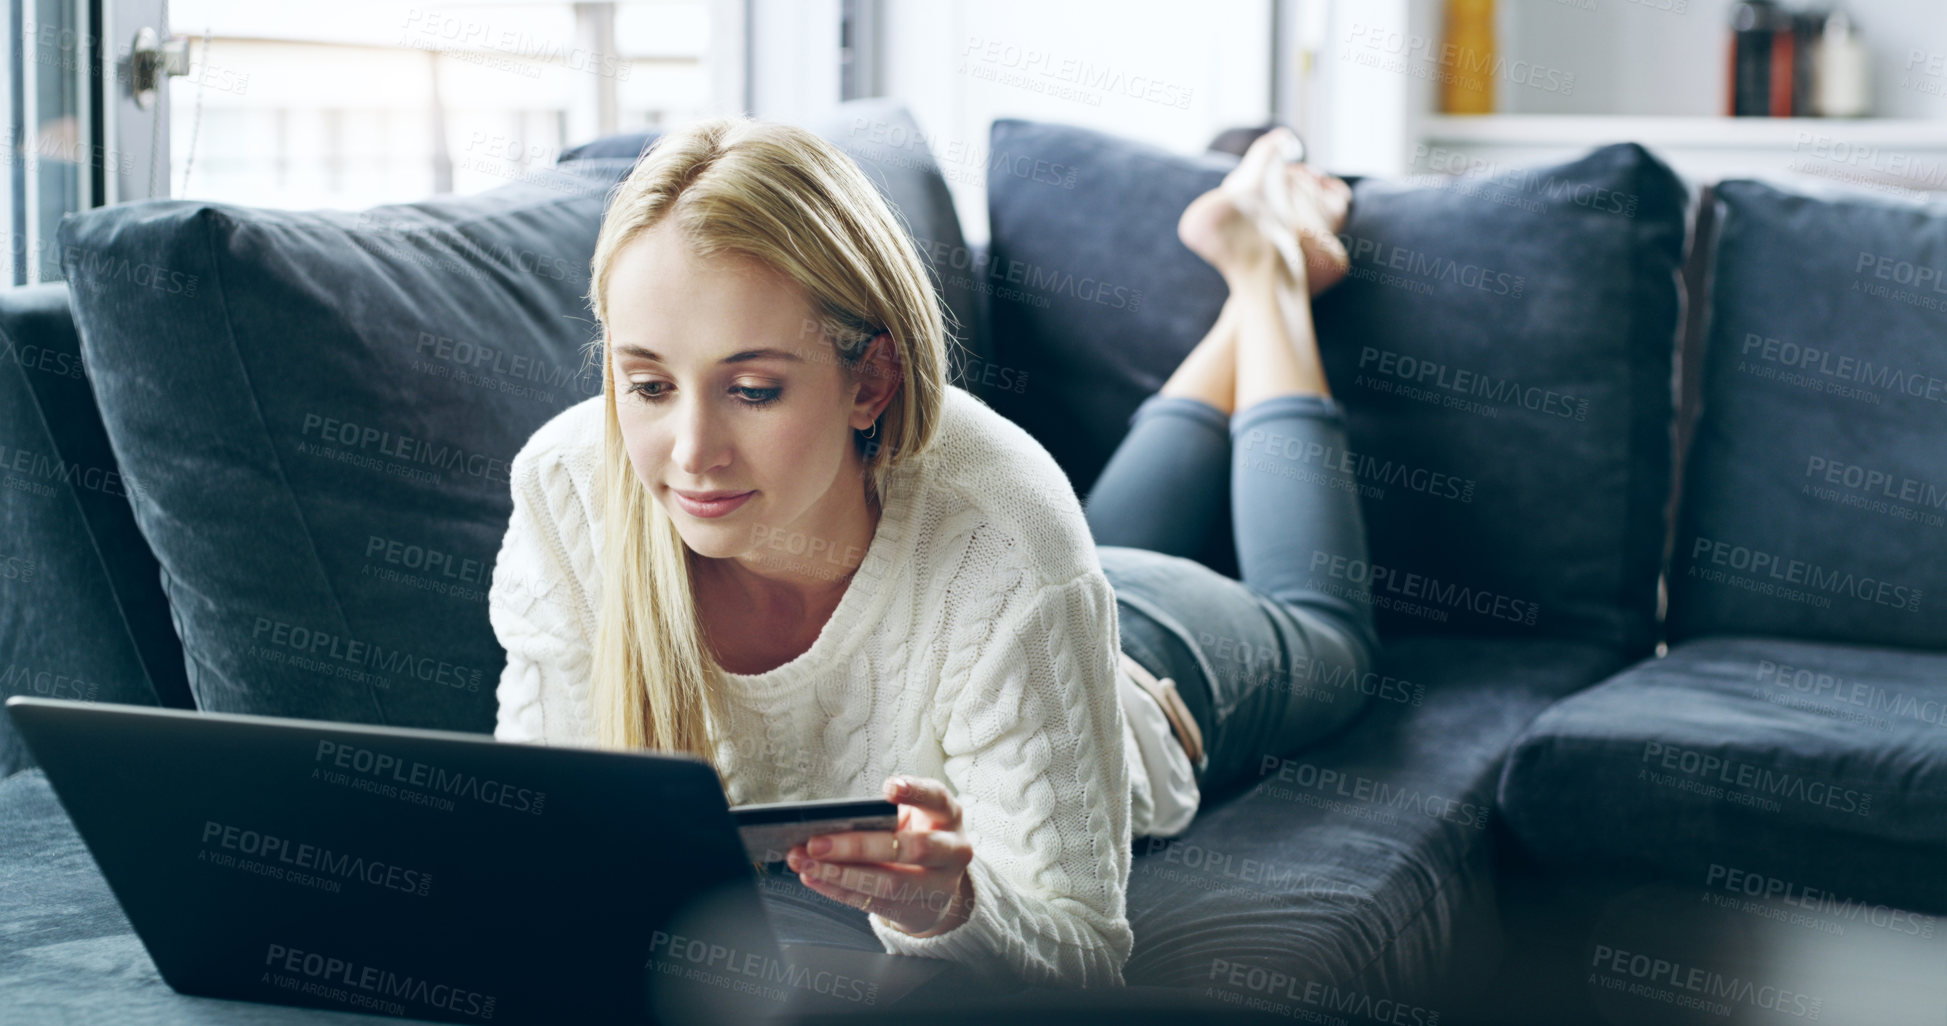 Buy stock photo Full length shot of an attractive young woman using her laptop to do some online shopping at home